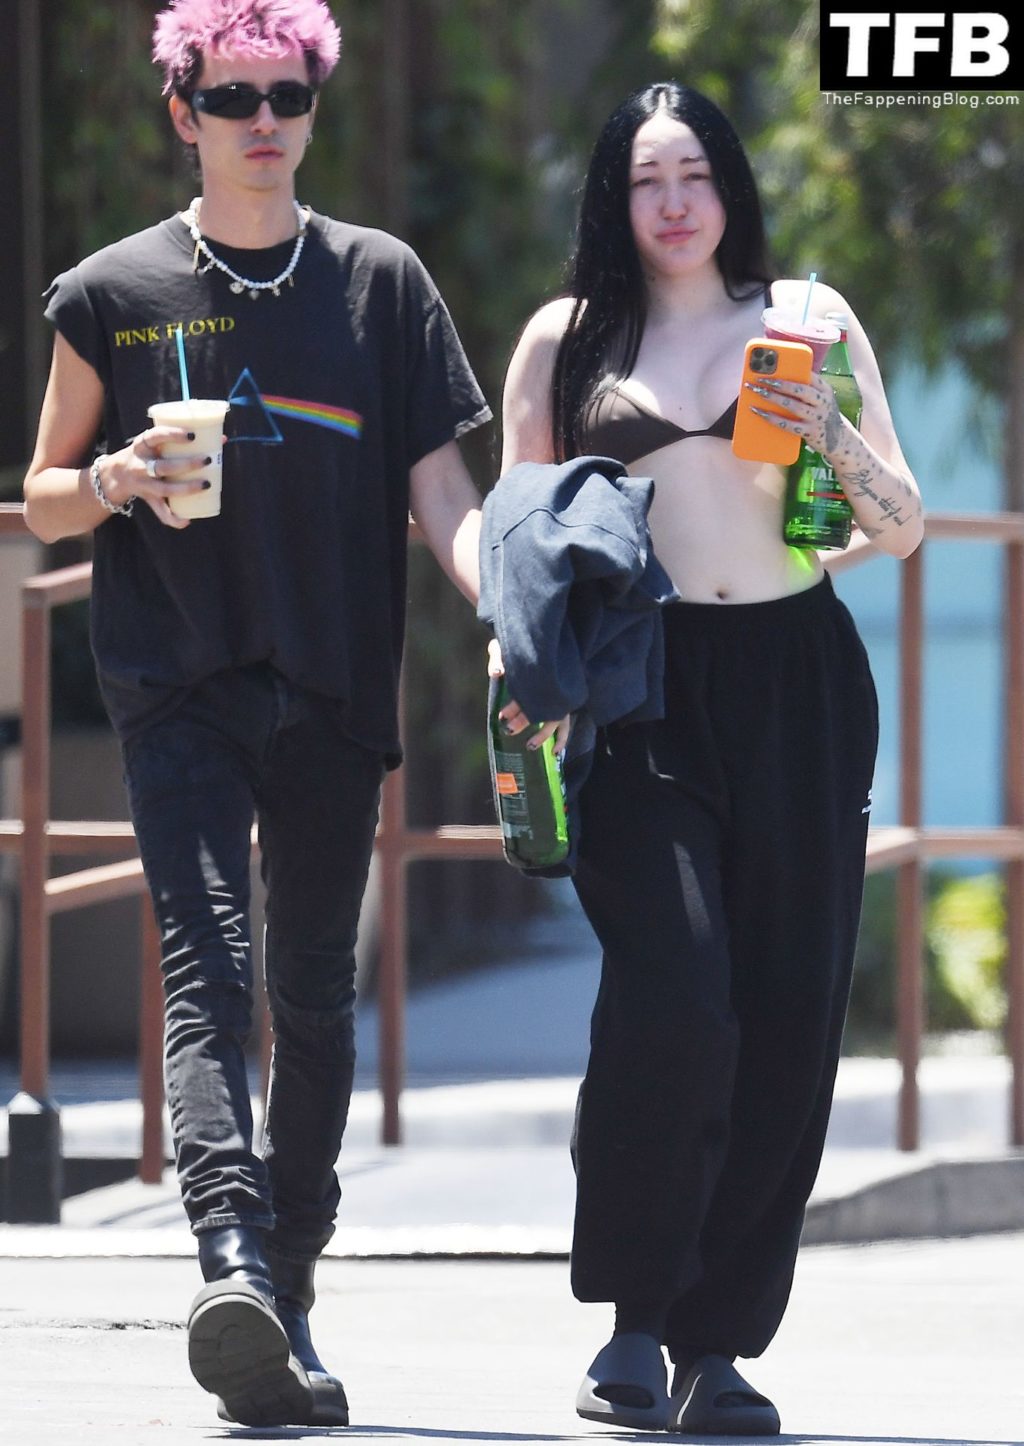 Noah Cyrus Sexy The Fappening Blog 14 1024x1446 - Noah Cyrus Slips Into a Bikini Top Cooling Off From the Sweltering Heat with Her Boyfriend in LA (17 Photos)